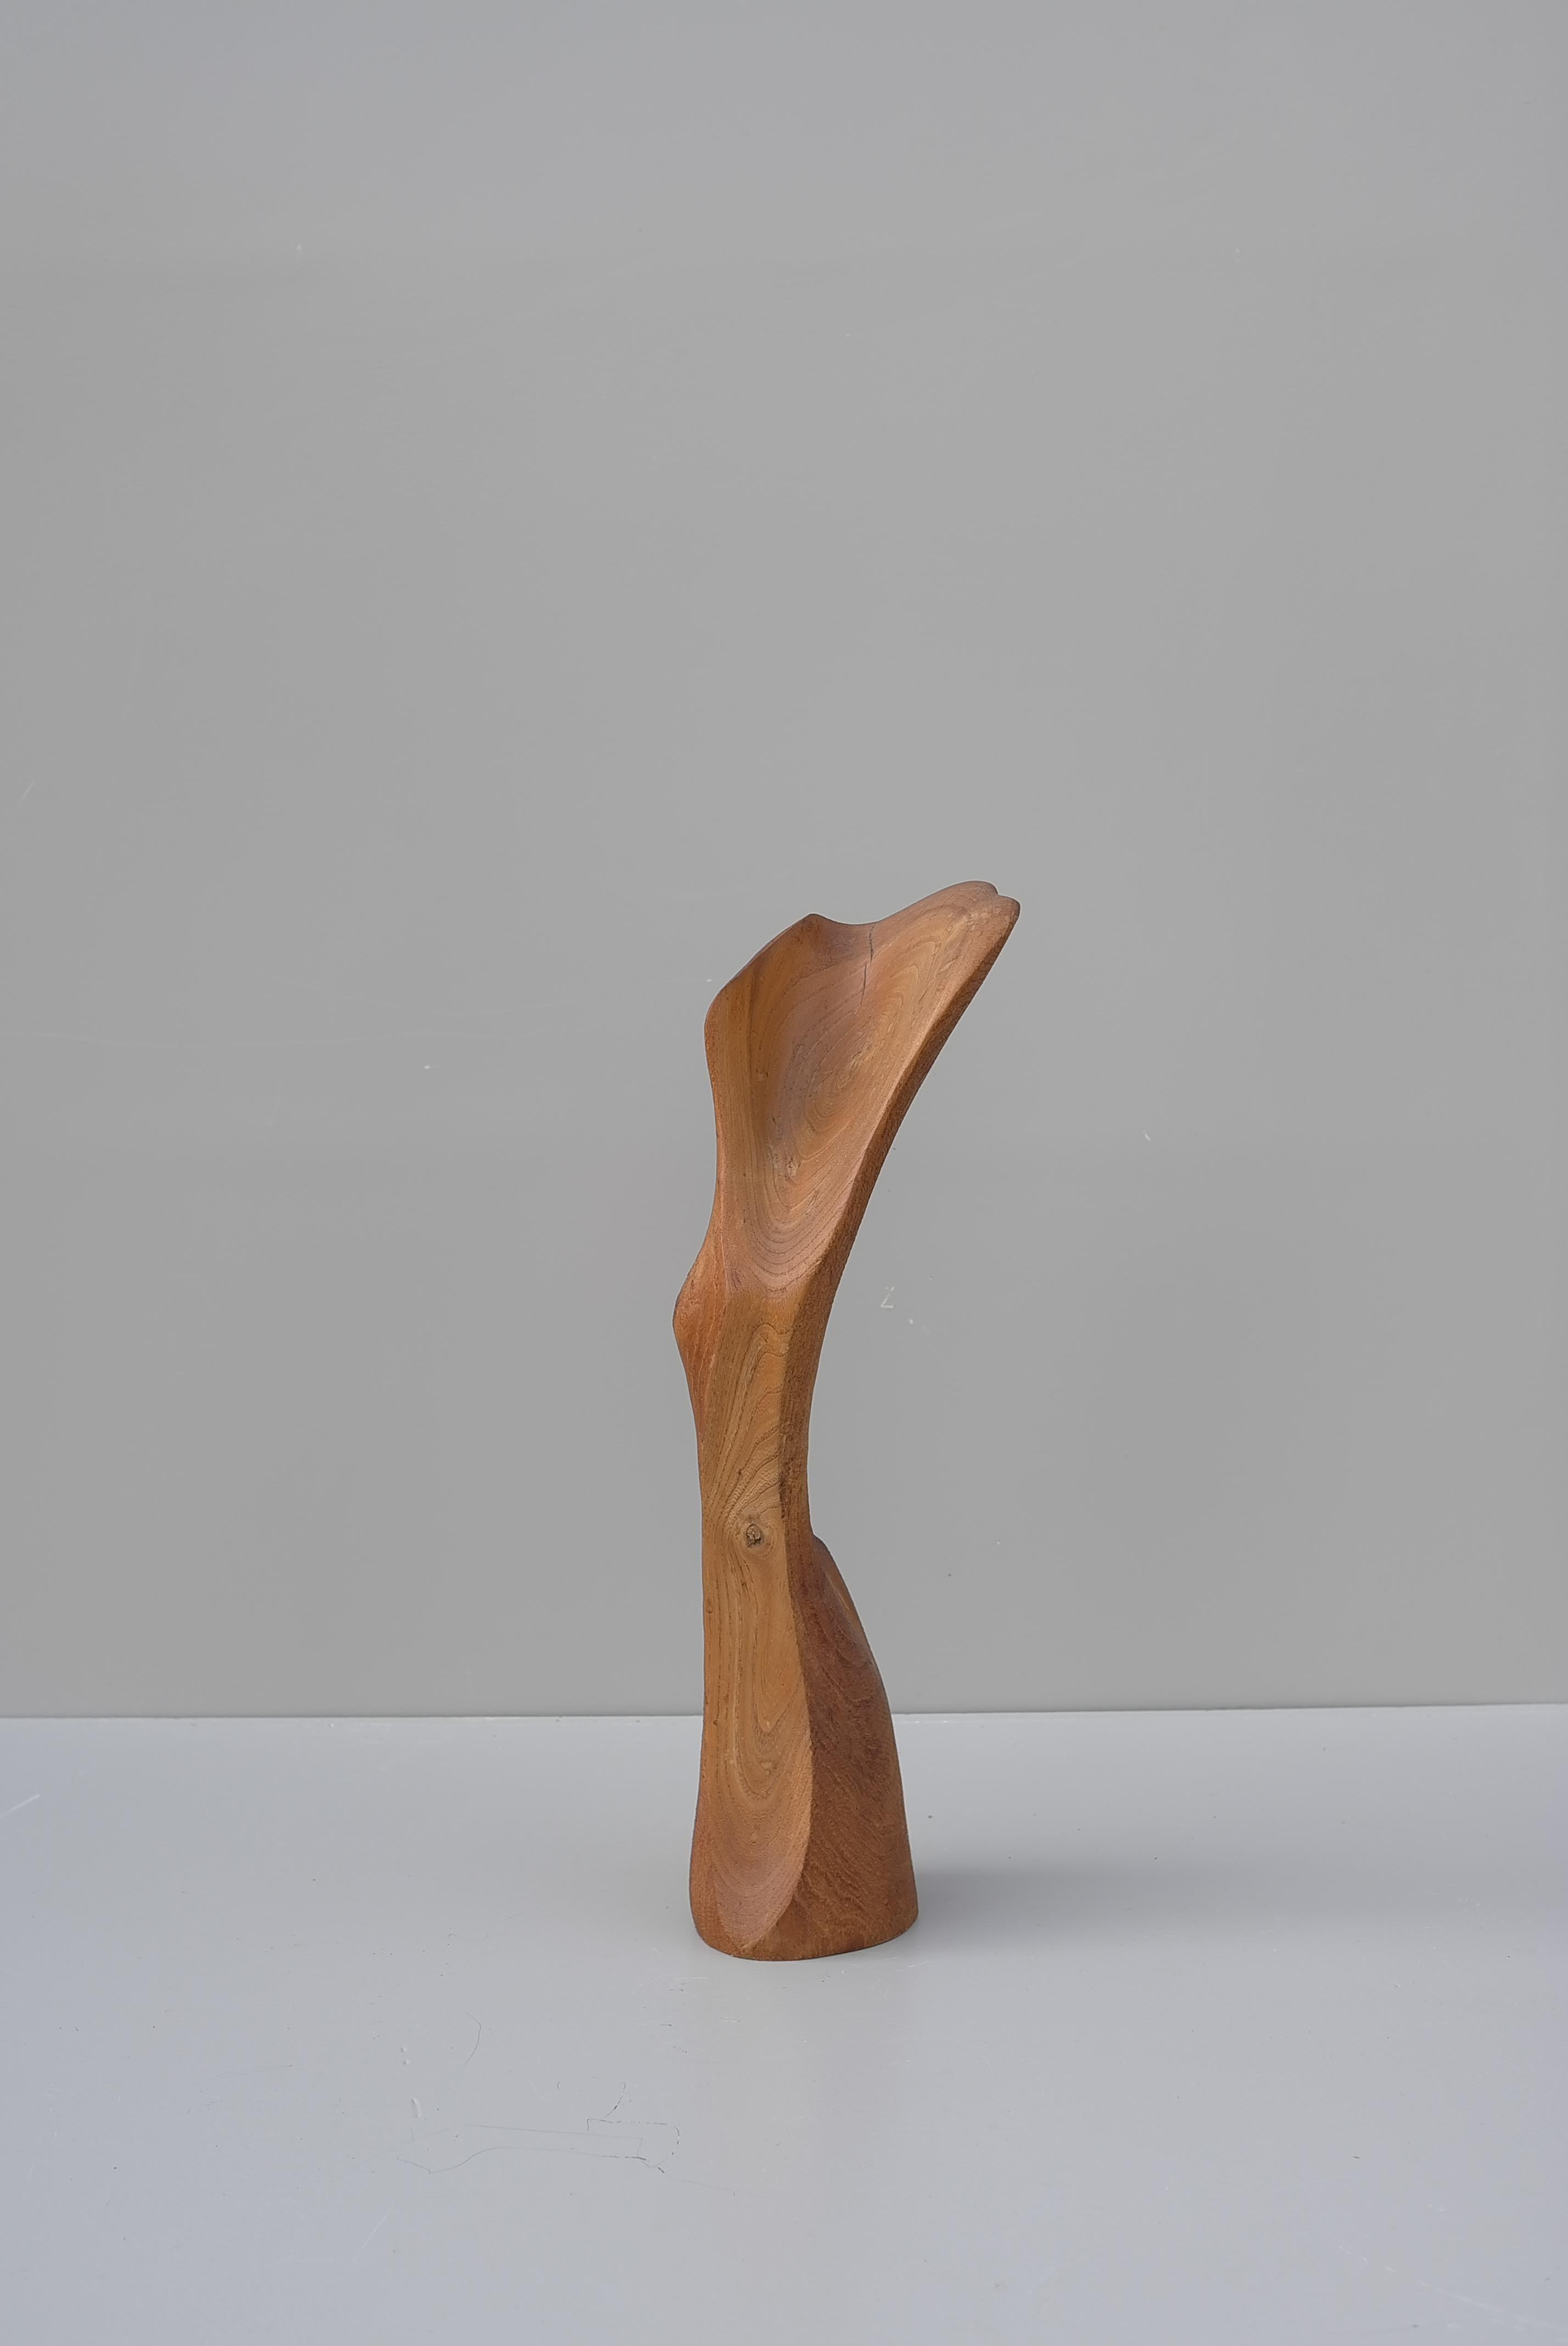  Abstract Mid-Century Modern Organic Wooden Sculpture, 1960's In Good Condition For Sale In Den Haag, NL